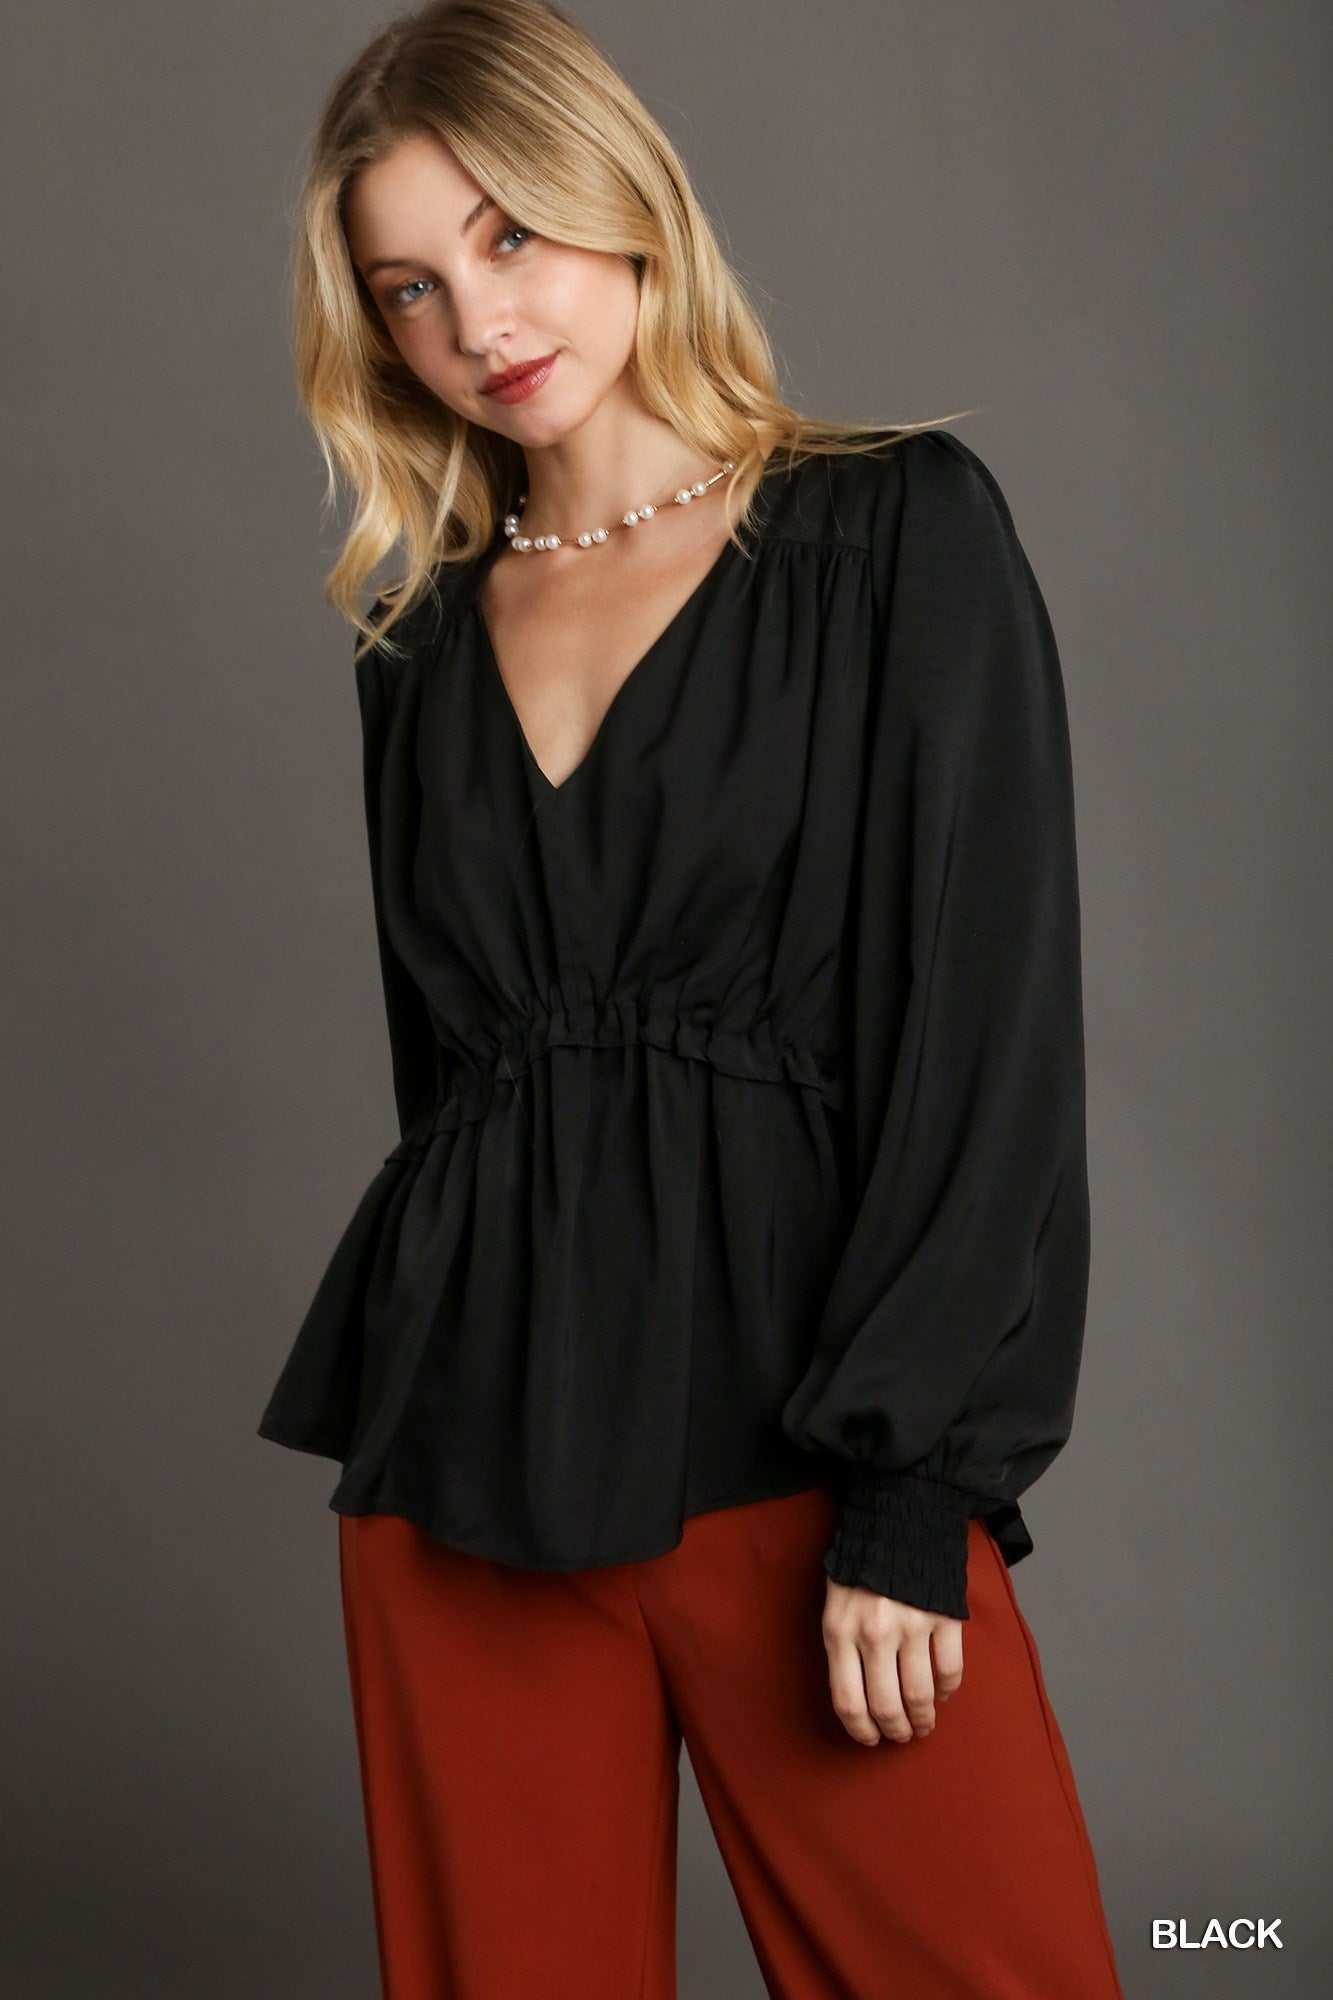 Satin V-neck Ruffle Baby Doll Top With Cuffed Long Sleeve.